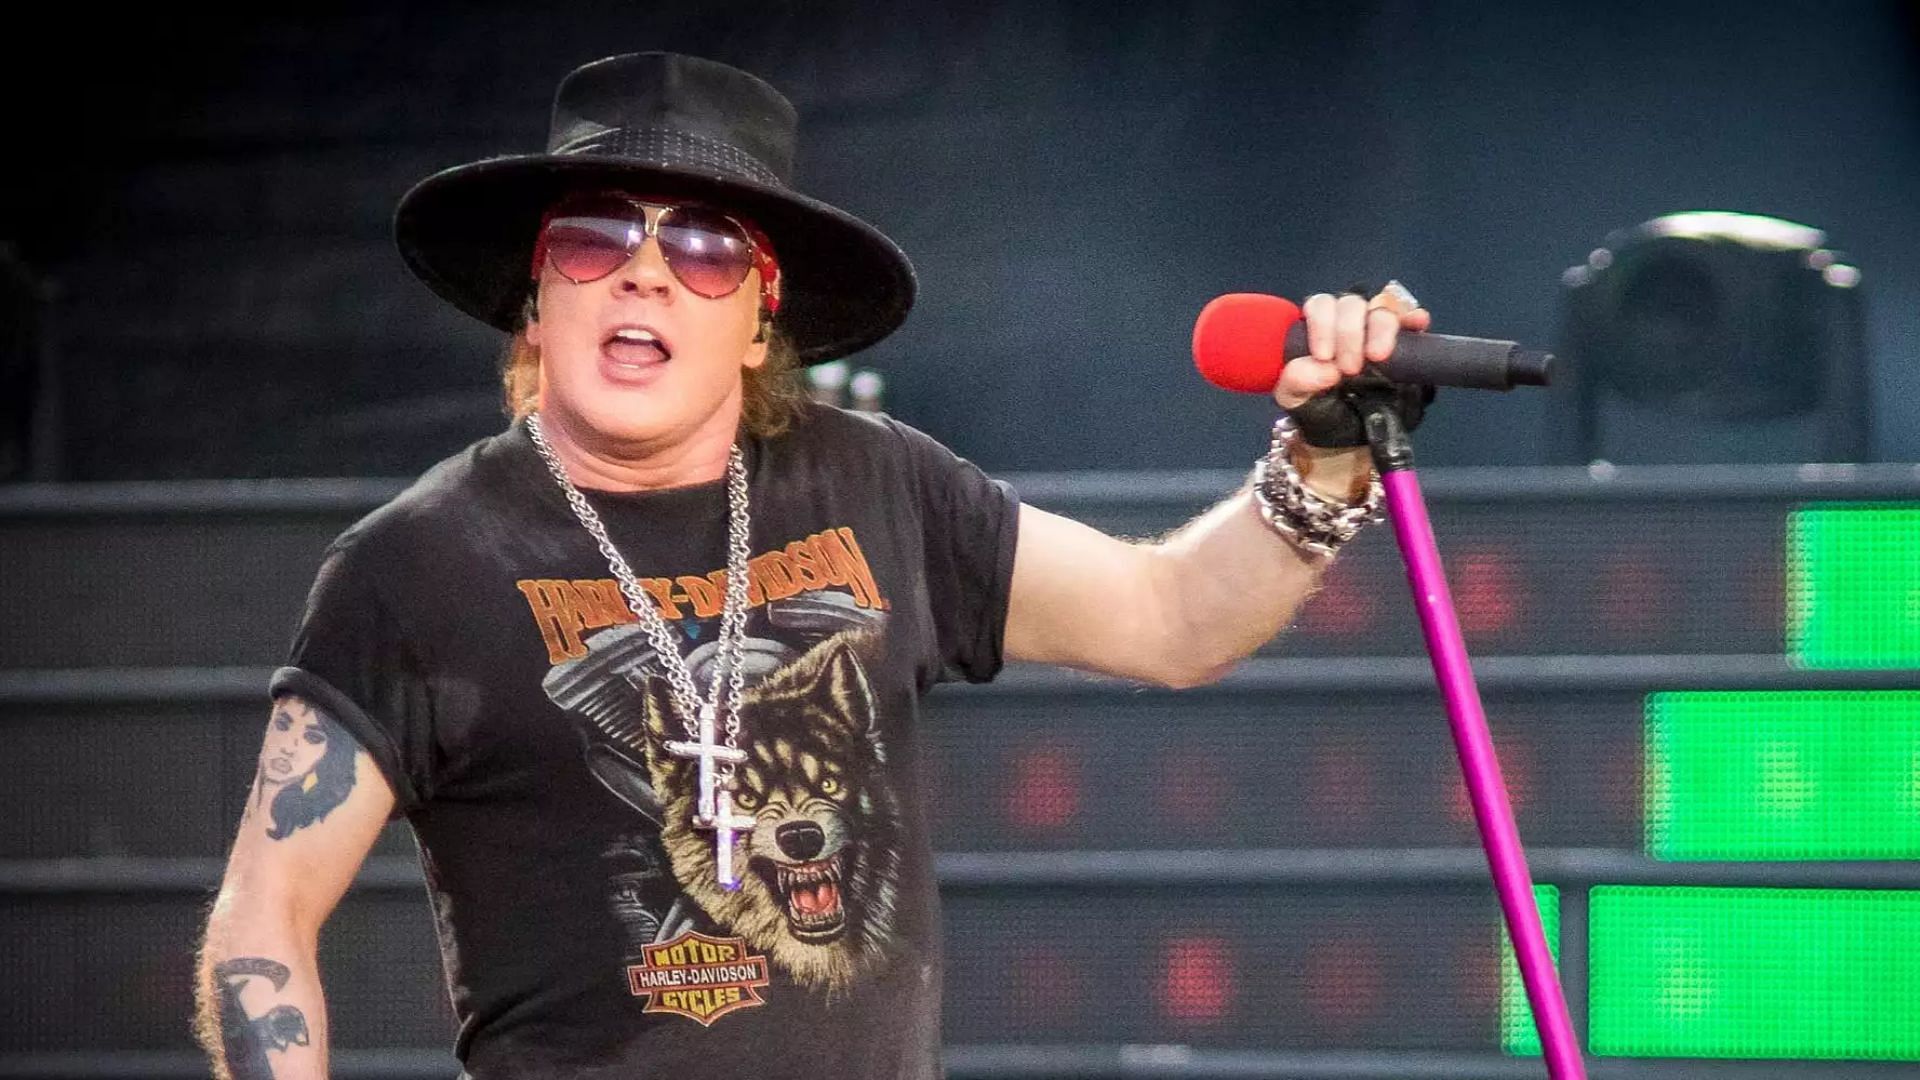 Axl Rose to stop throwing mics post concert after one struck a woman in the face (image via Getty/Mark Horton)